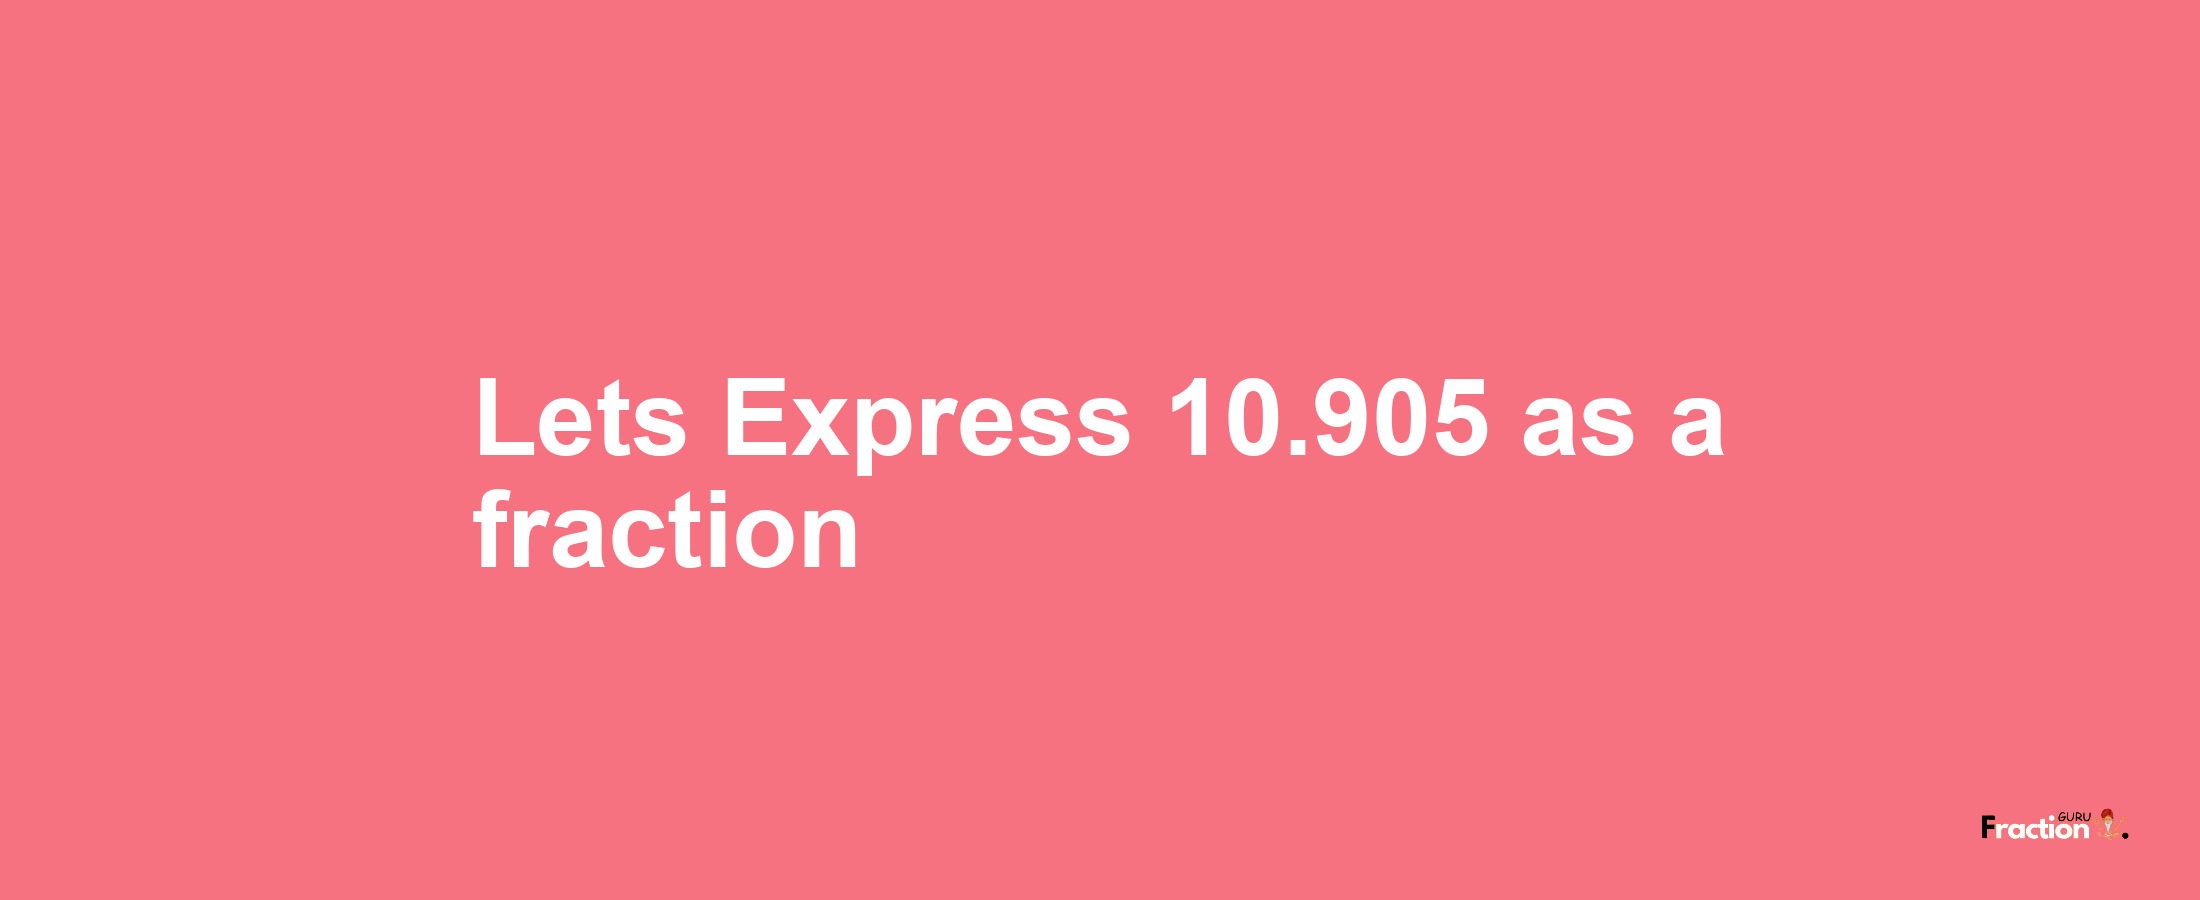 Lets Express 10.905 as afraction